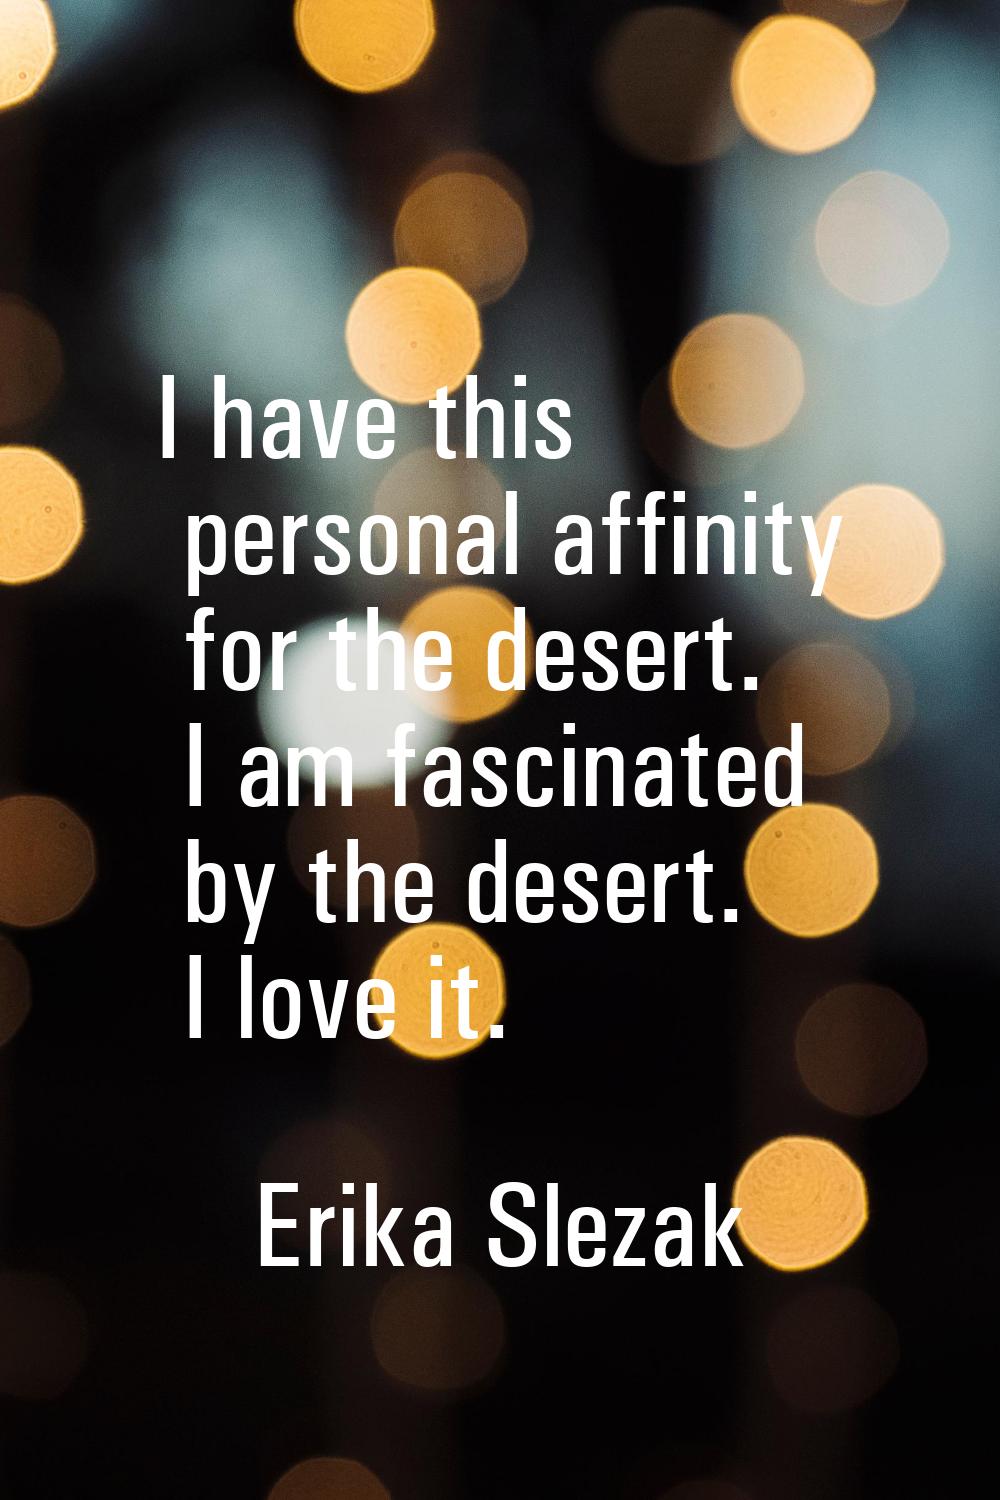 I have this personal affinity for the desert. I am fascinated by the desert. I love it.